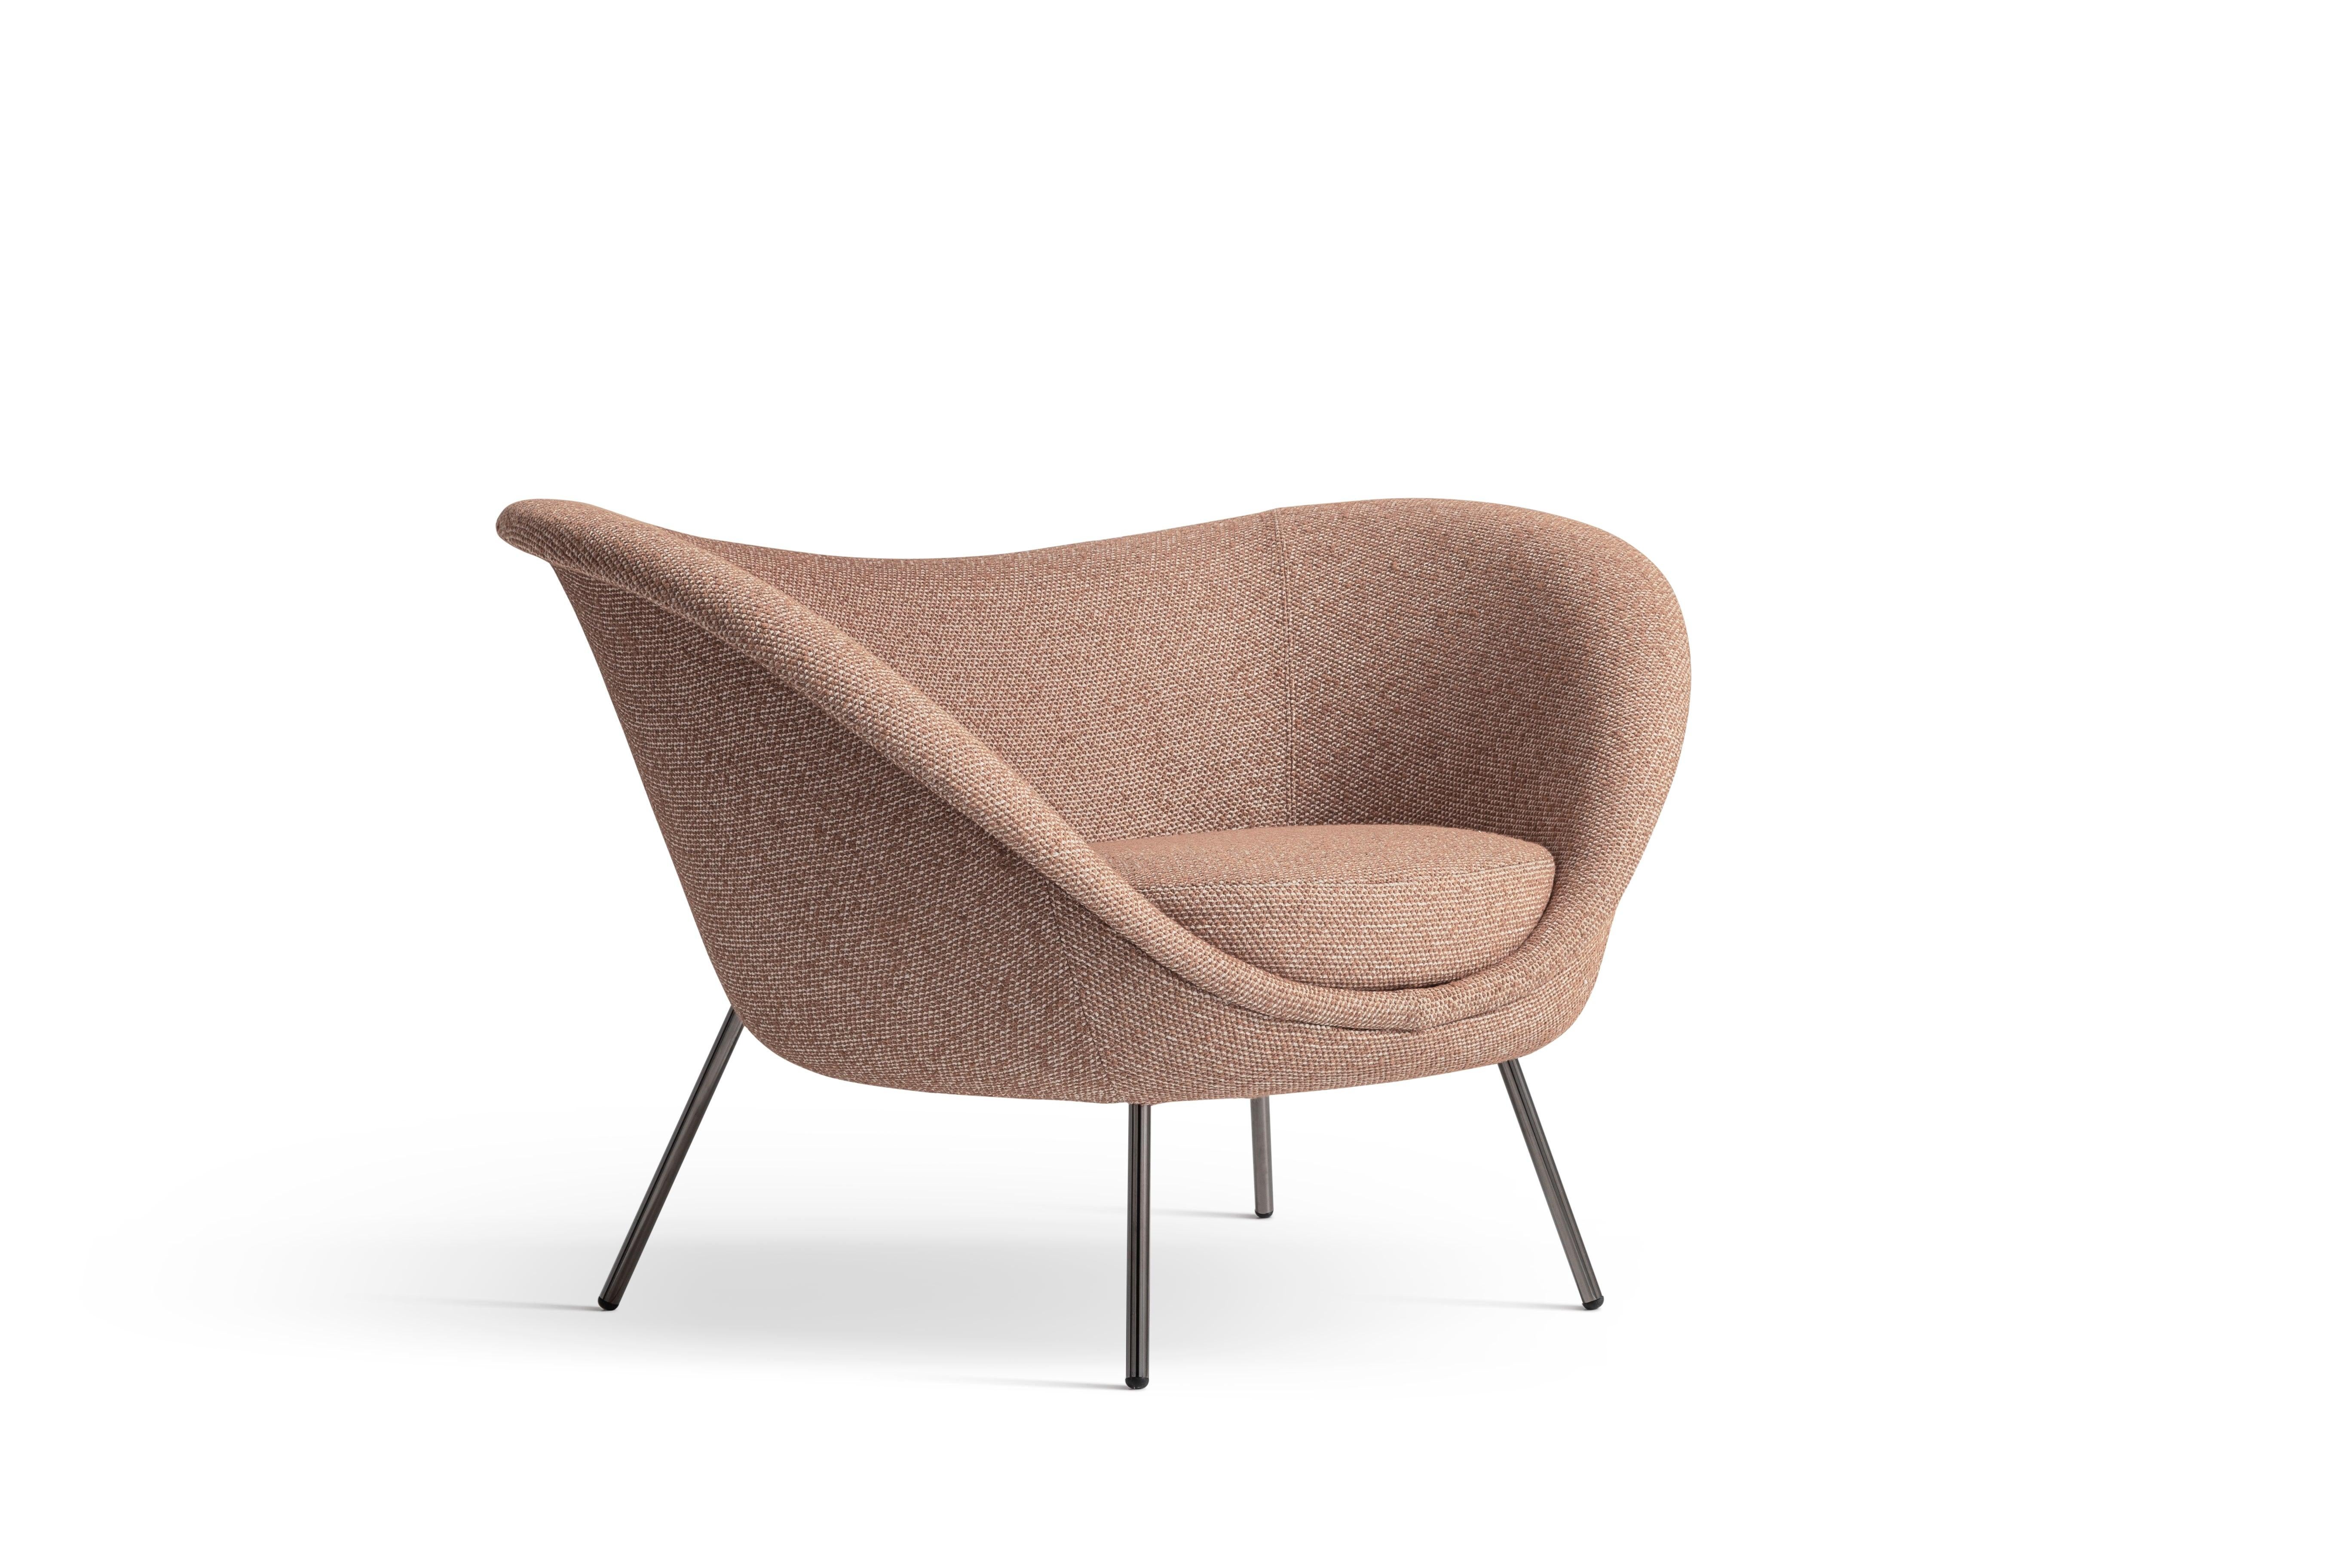 Part of the Molteni&C Heritage collection, this armchair, was designed for one of the projects closest to Gio Ponti’s heart, the villa of the Planchart collectors in Caracas, (1953-1957). It is part of the Gio Ponti collection, which was curated by